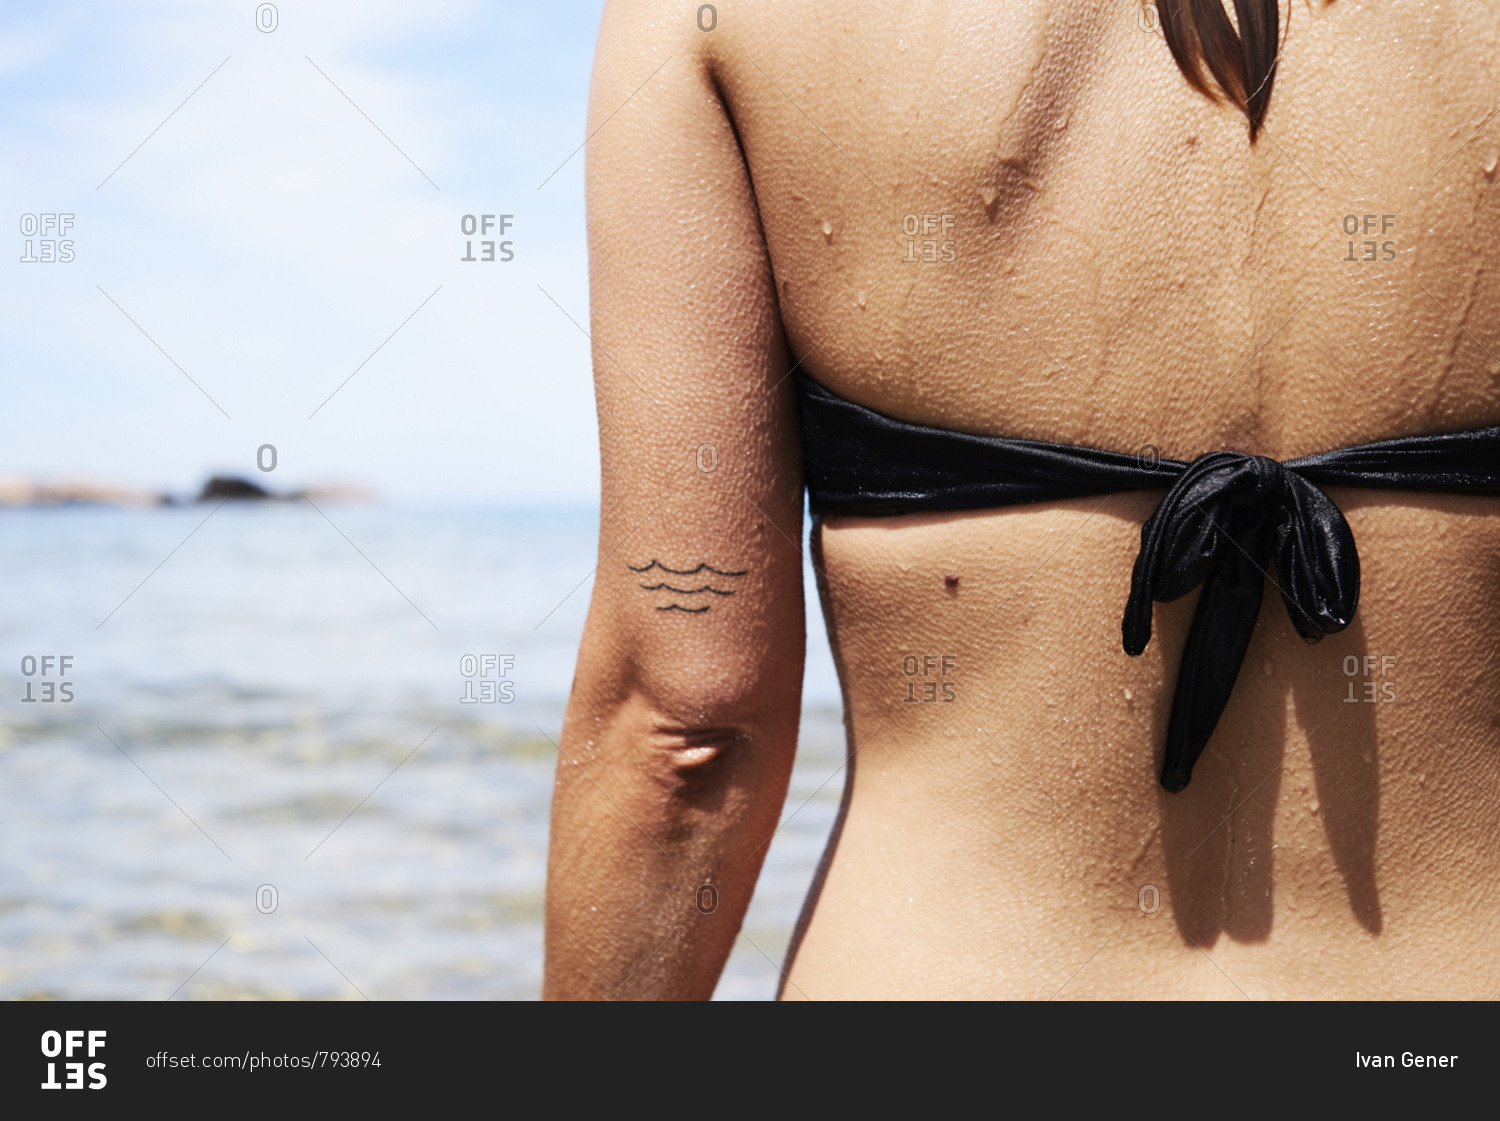 Back view of woman in black bikini top with goose bumps skin and wave tattoo